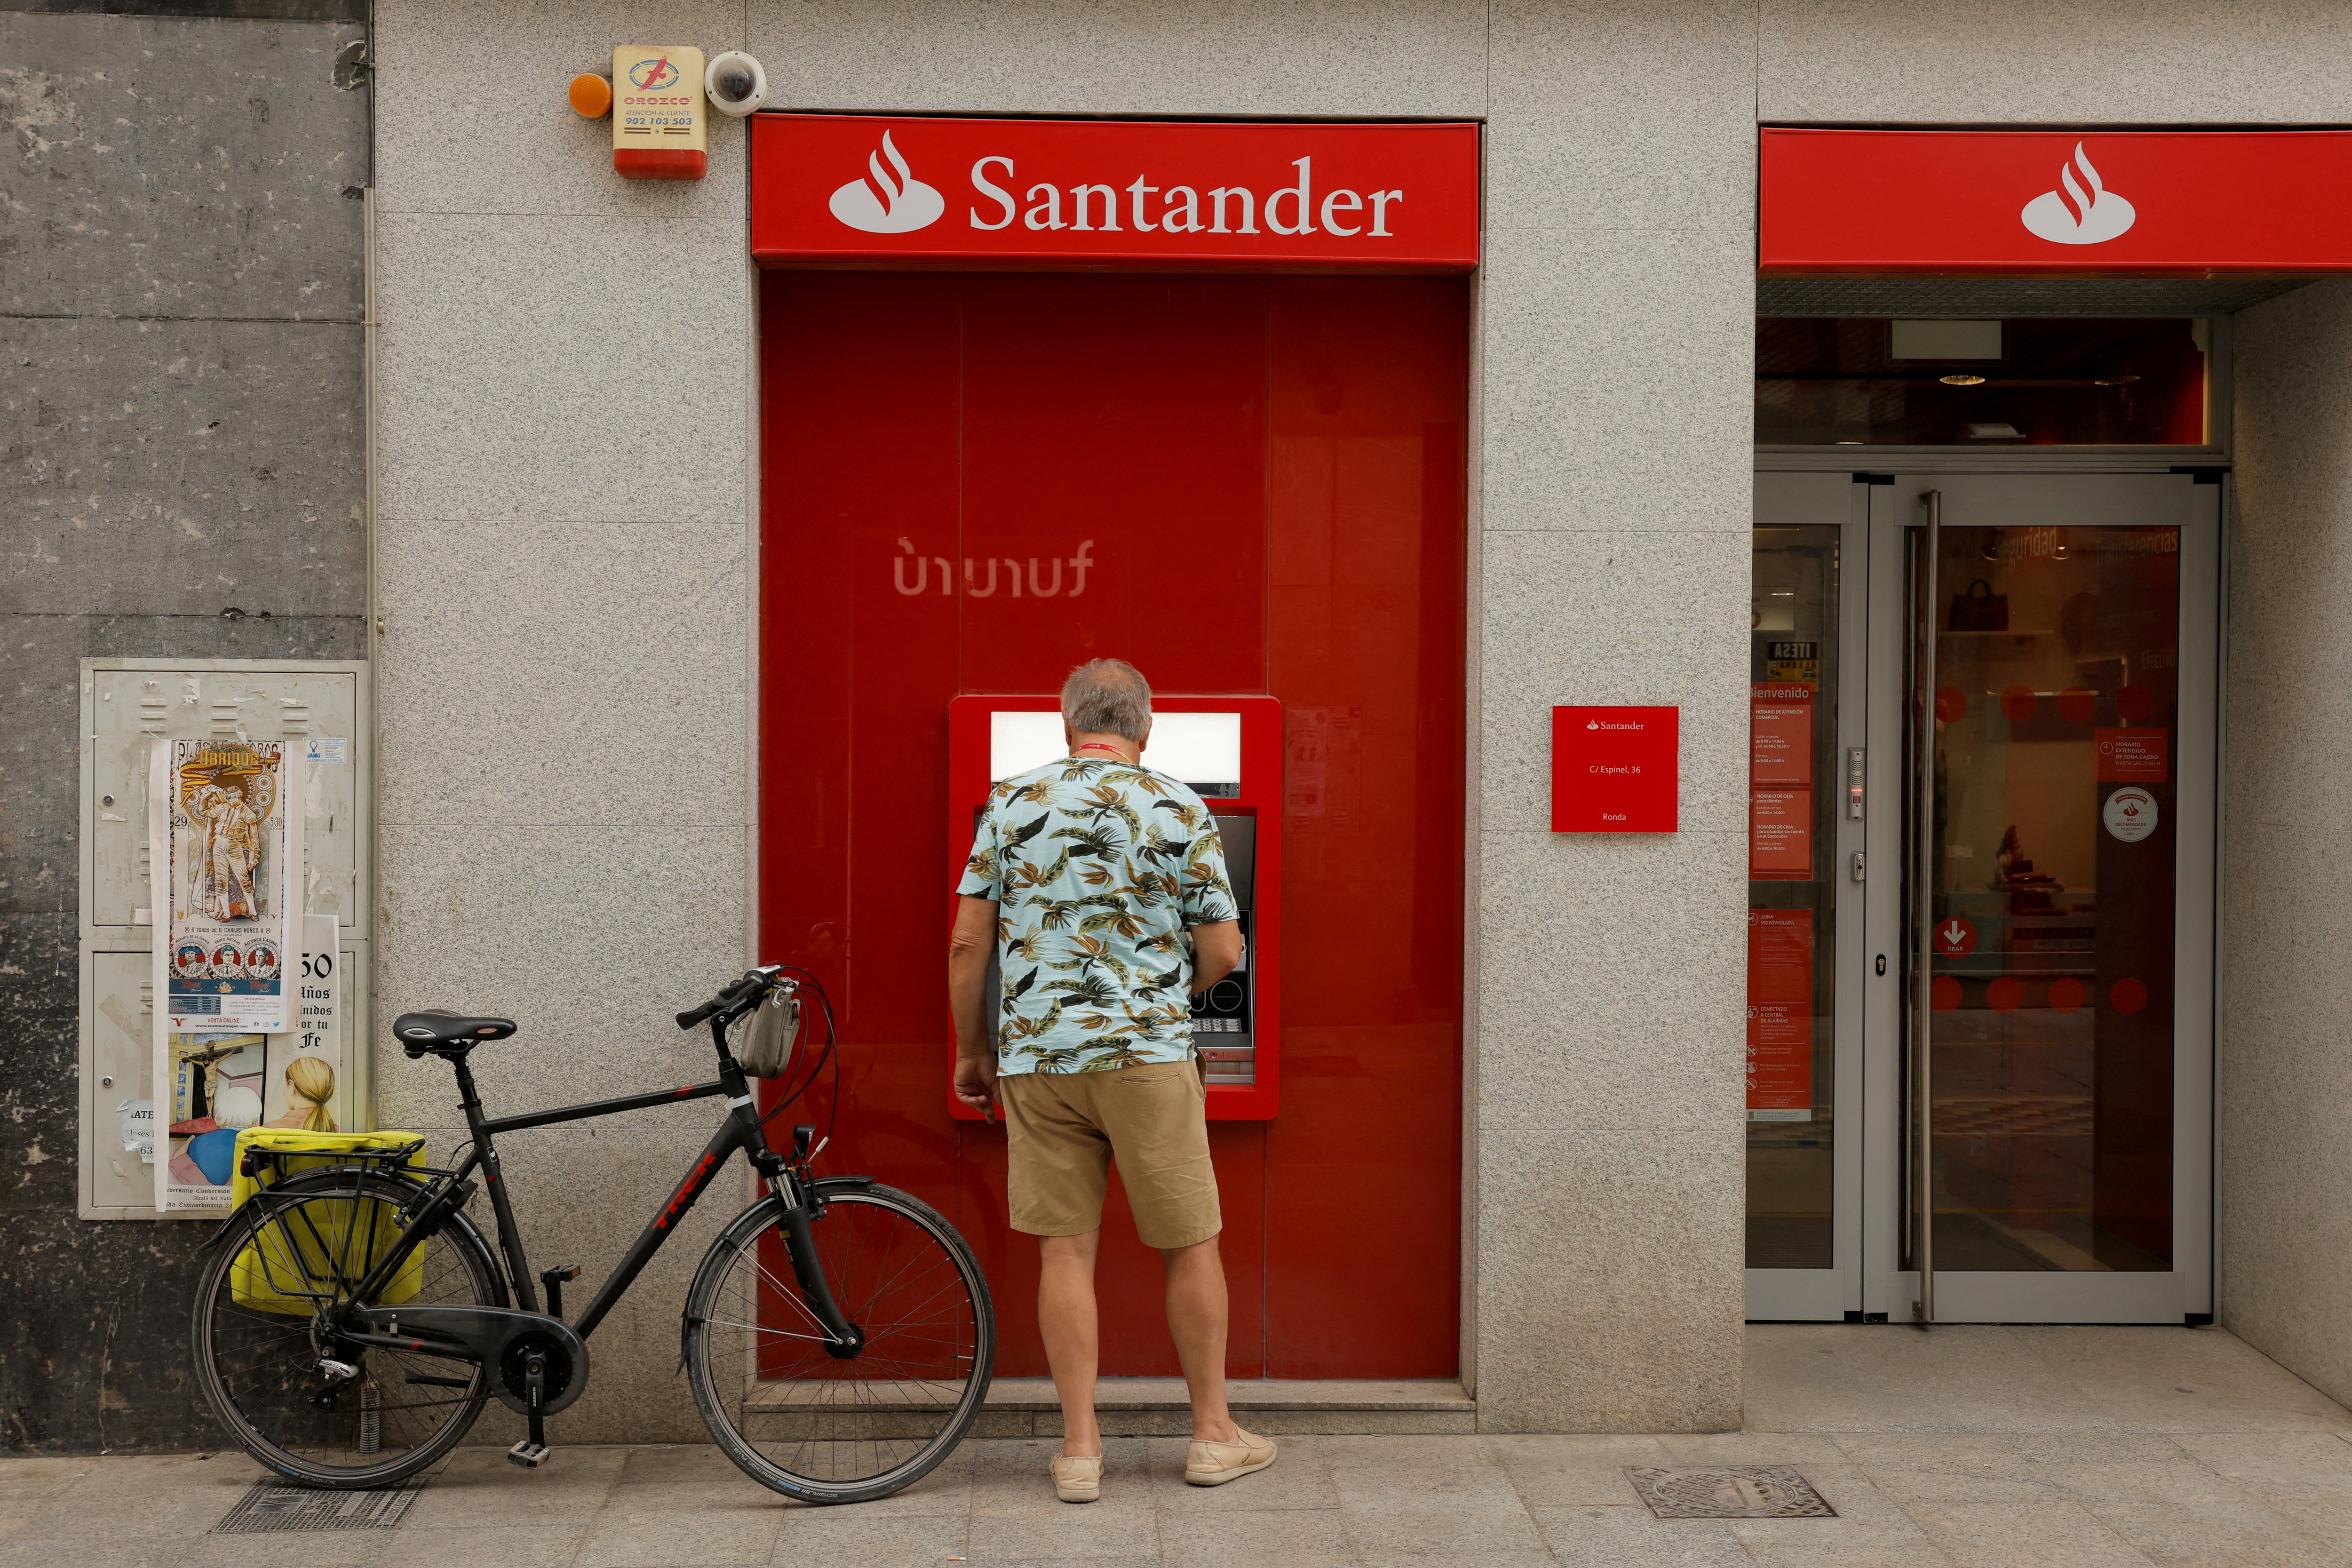 Santander, one of the world's most valued brands